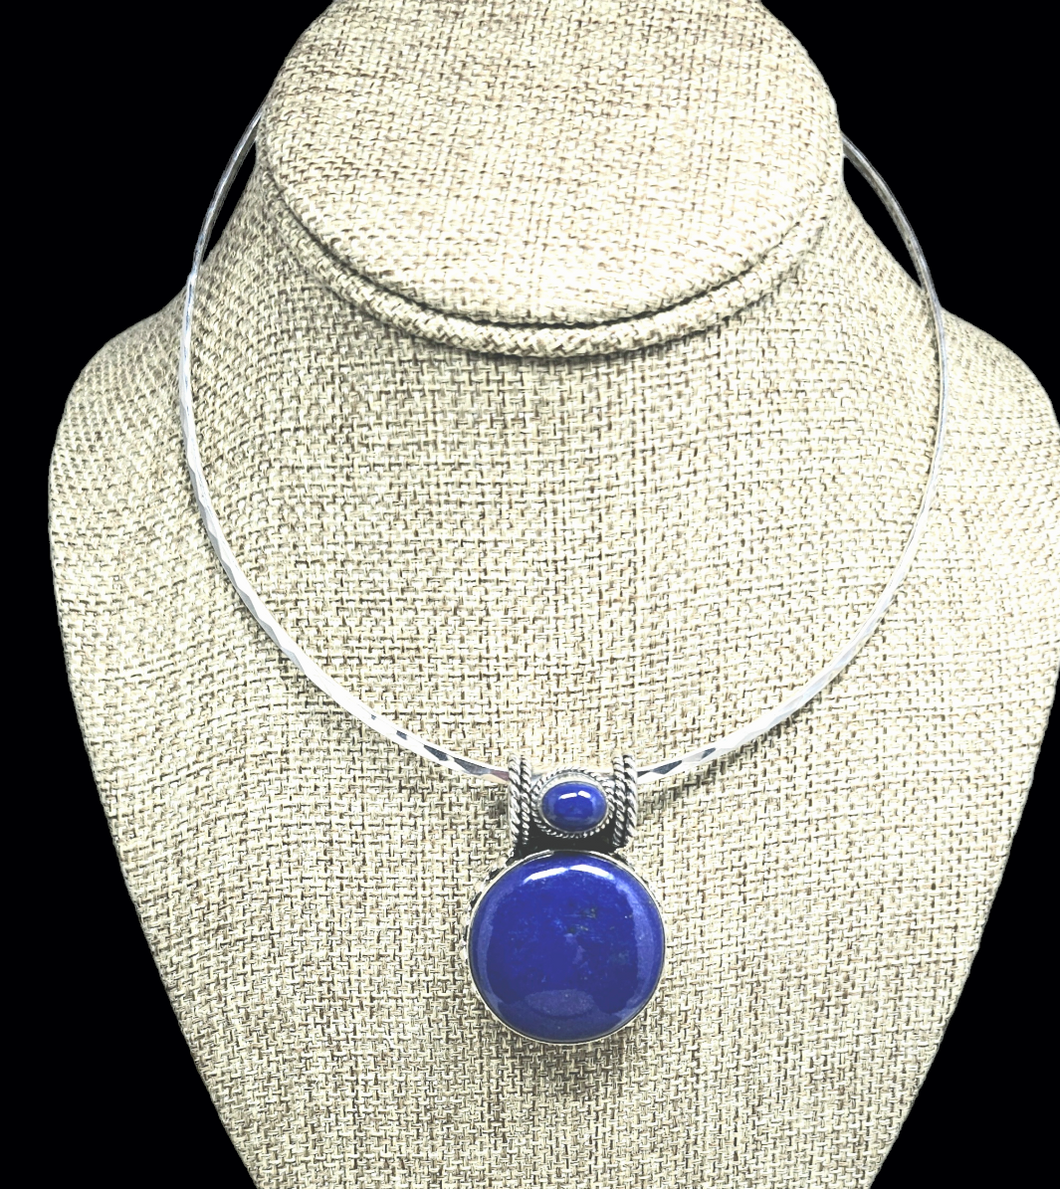 Handcrafted  Sterling Silver Pendant with Lapis Lazuli